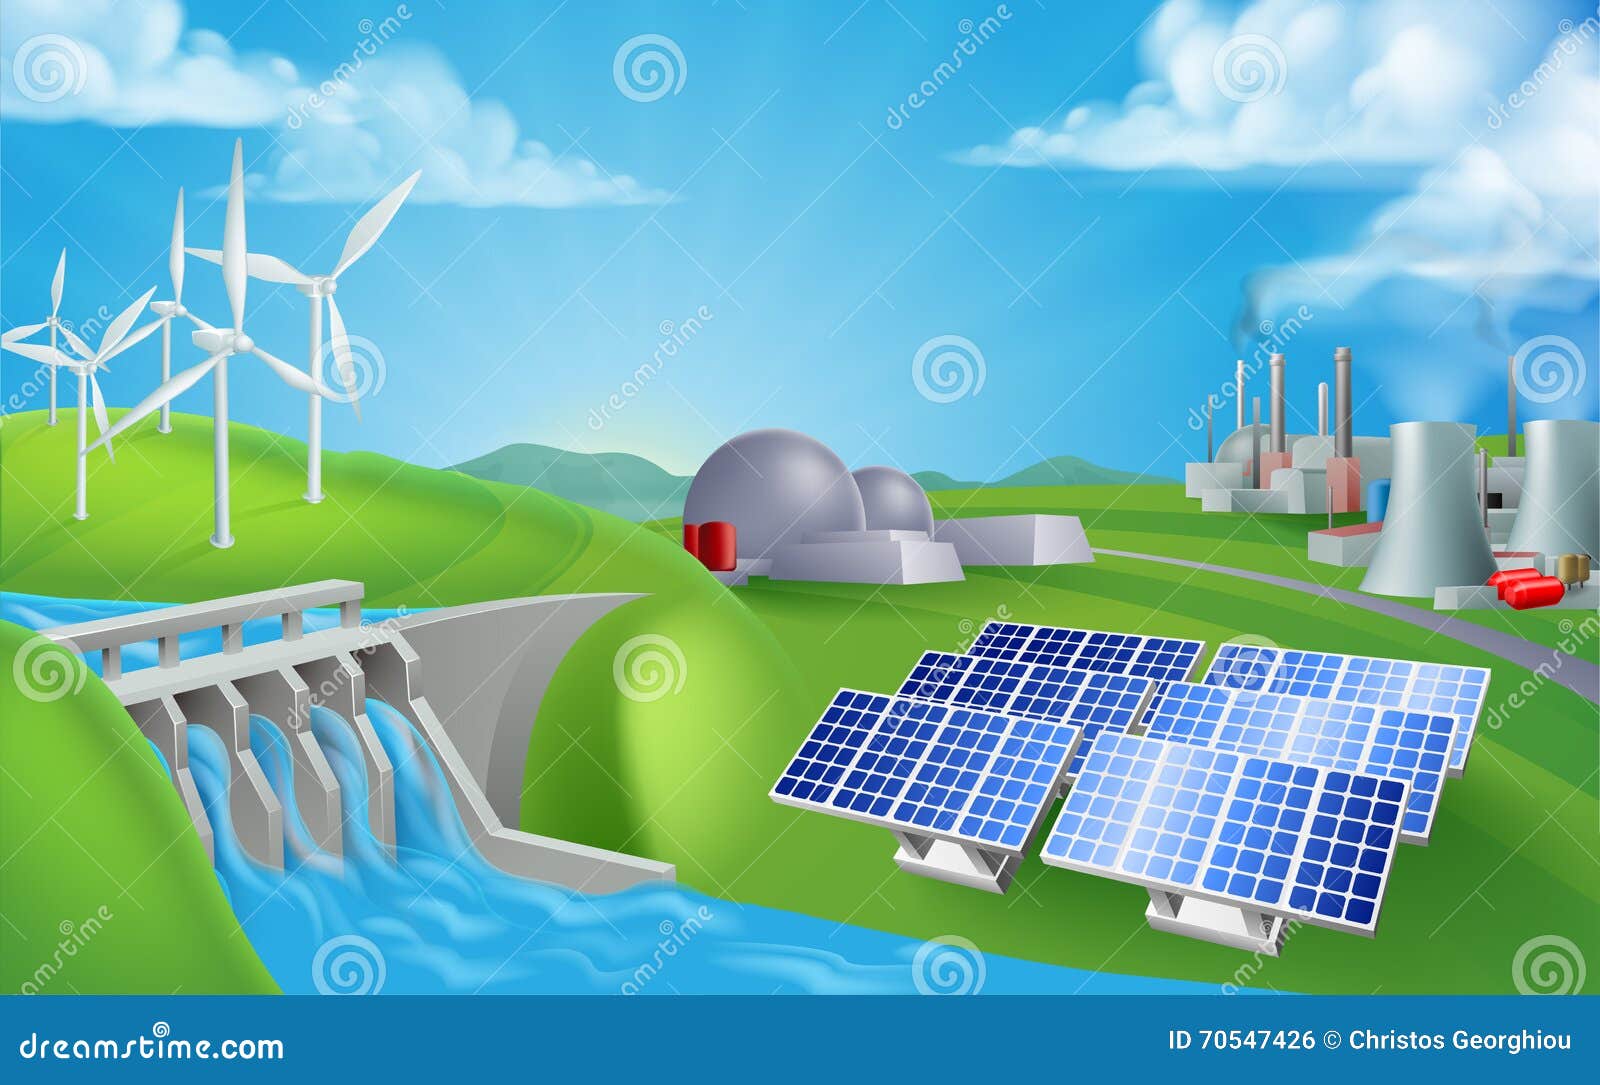 Energy or power generation sources illustration. Includes renewable 